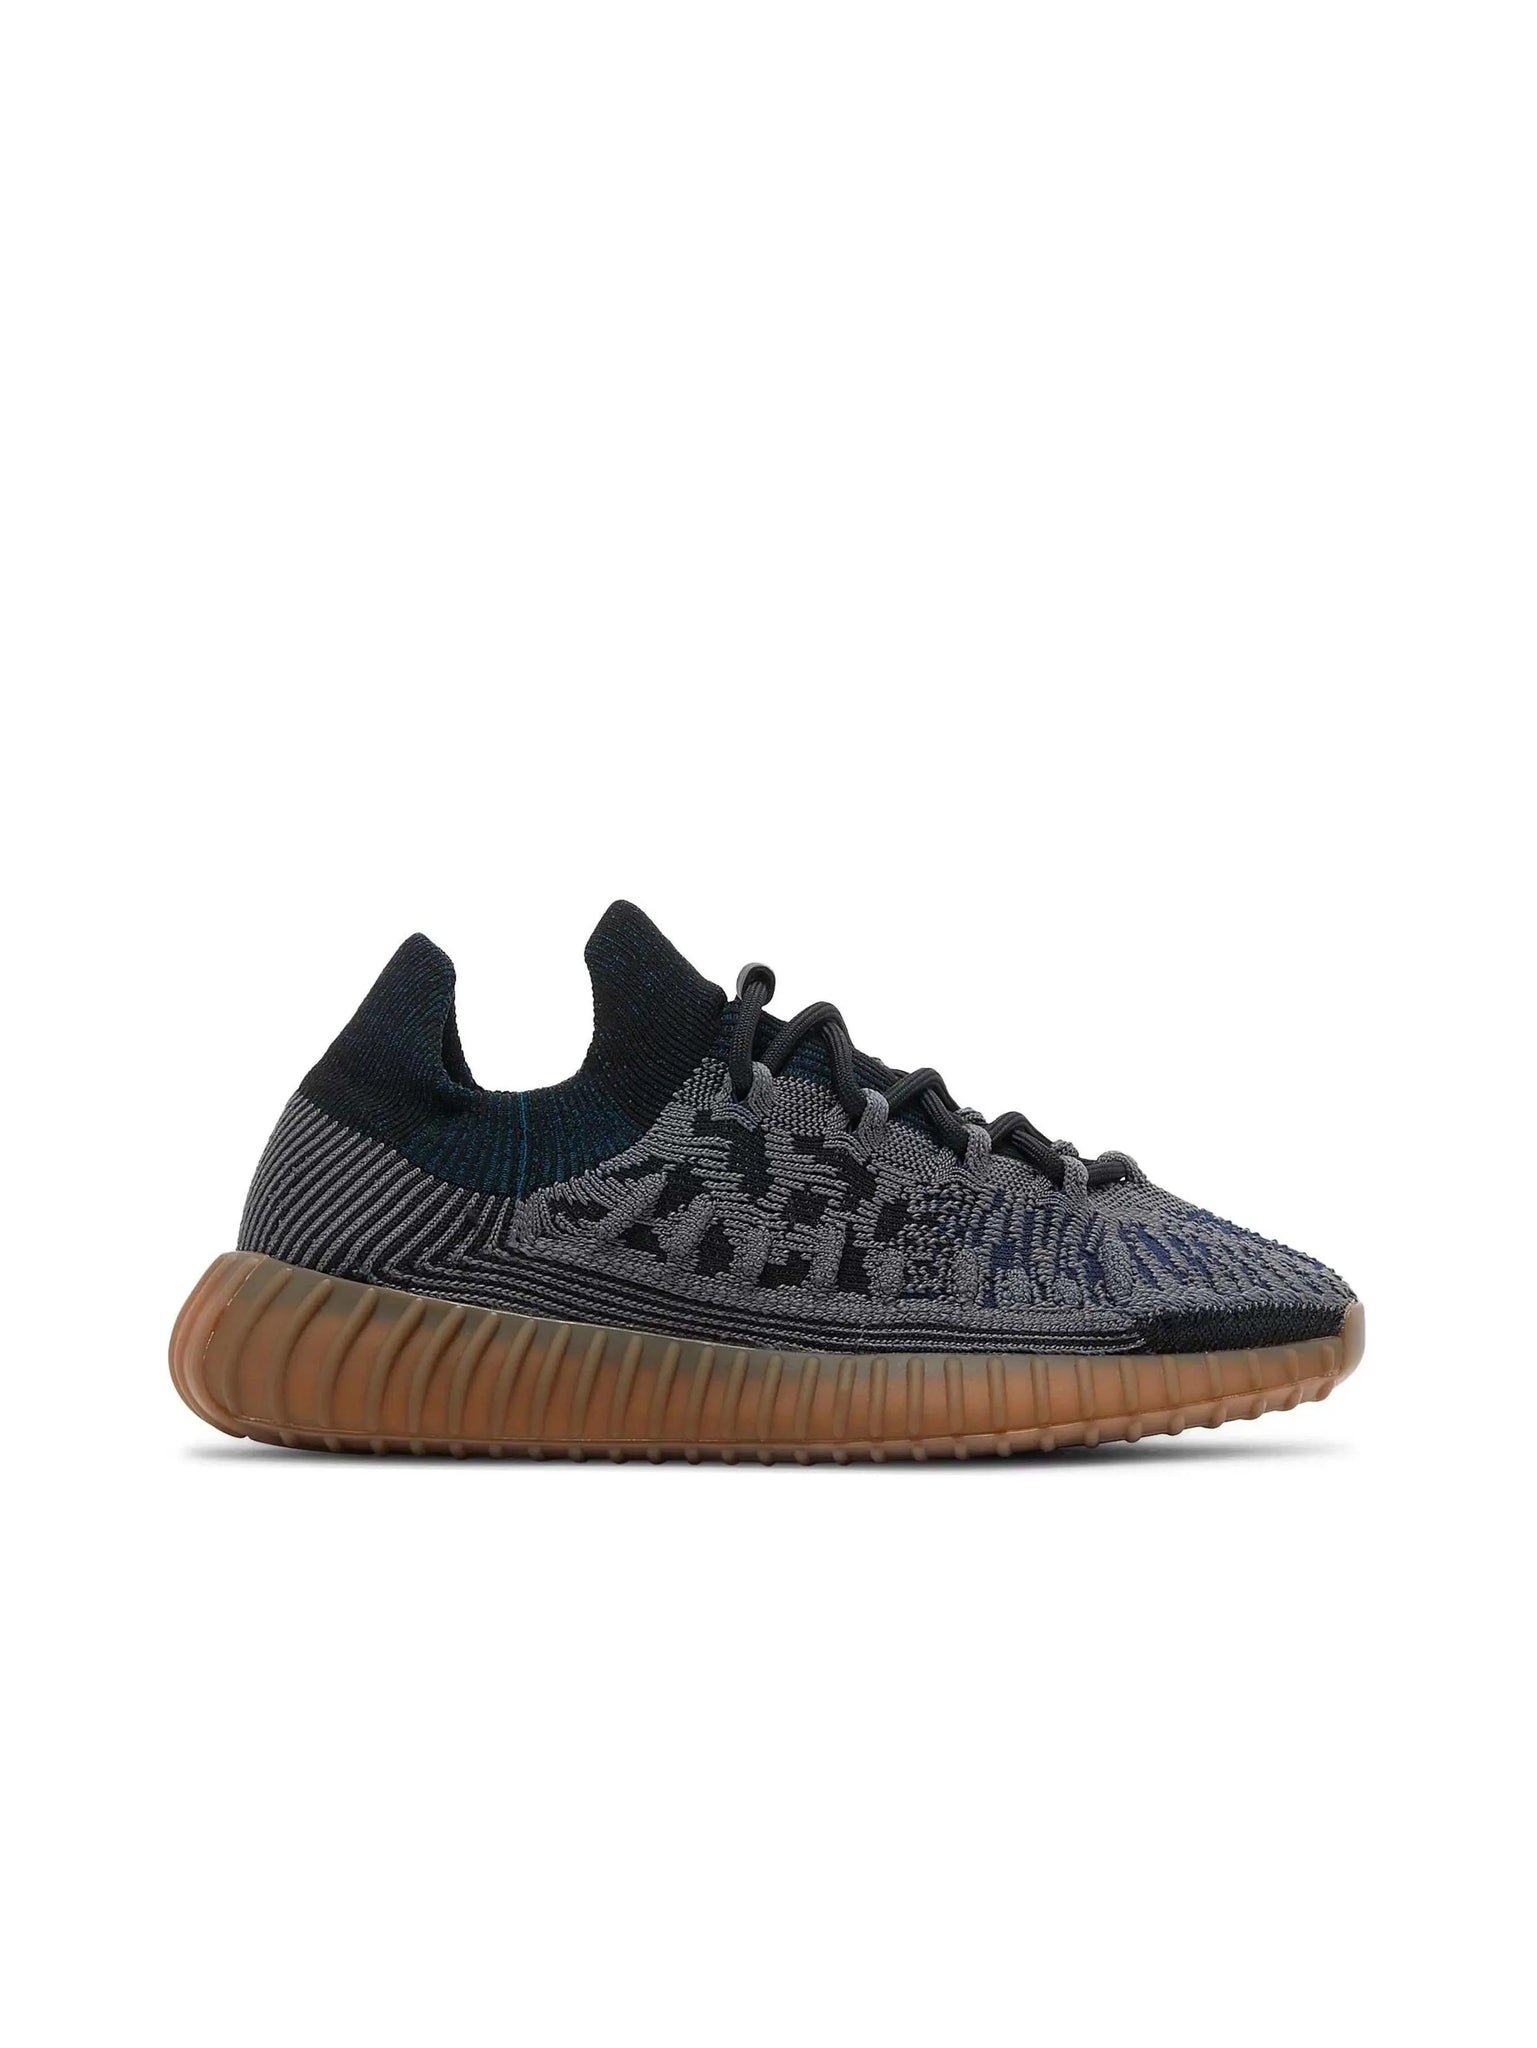 adidas Yeezy 350 V2 CMPCT Slate Blue in Auckland, New Zealand - Shop name